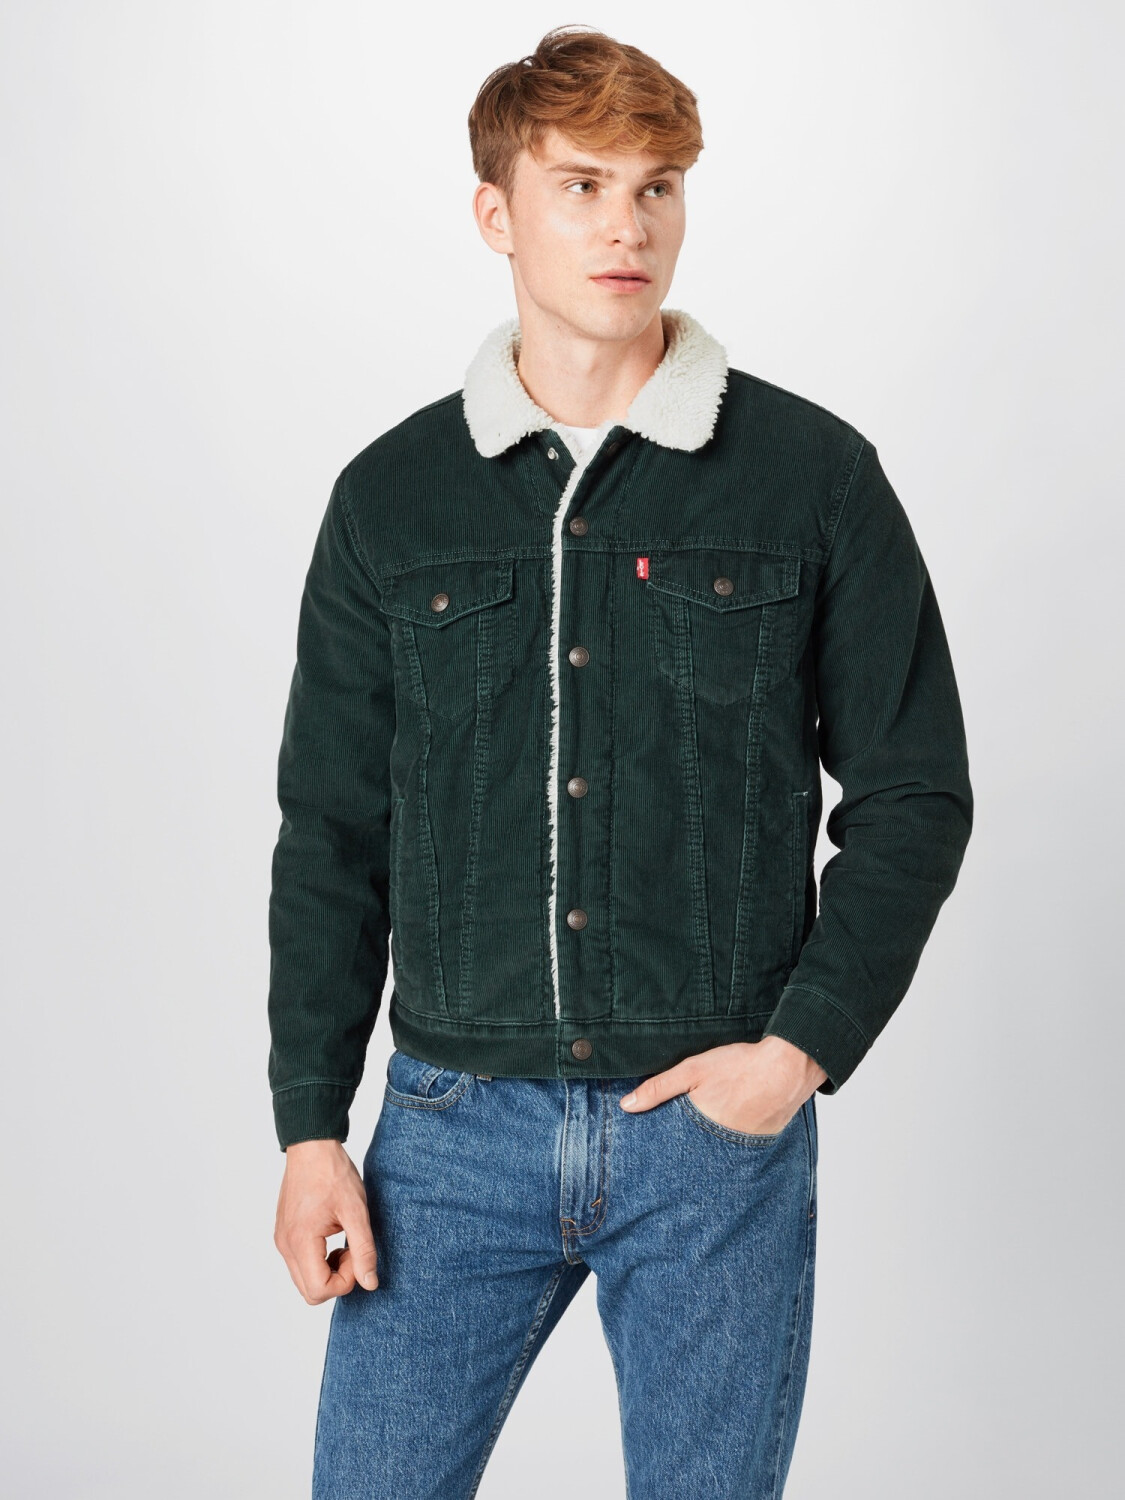 Buy Levi's Type 3 Sherpa Trucker Jacket scarab cord from £60.00 (Today ...